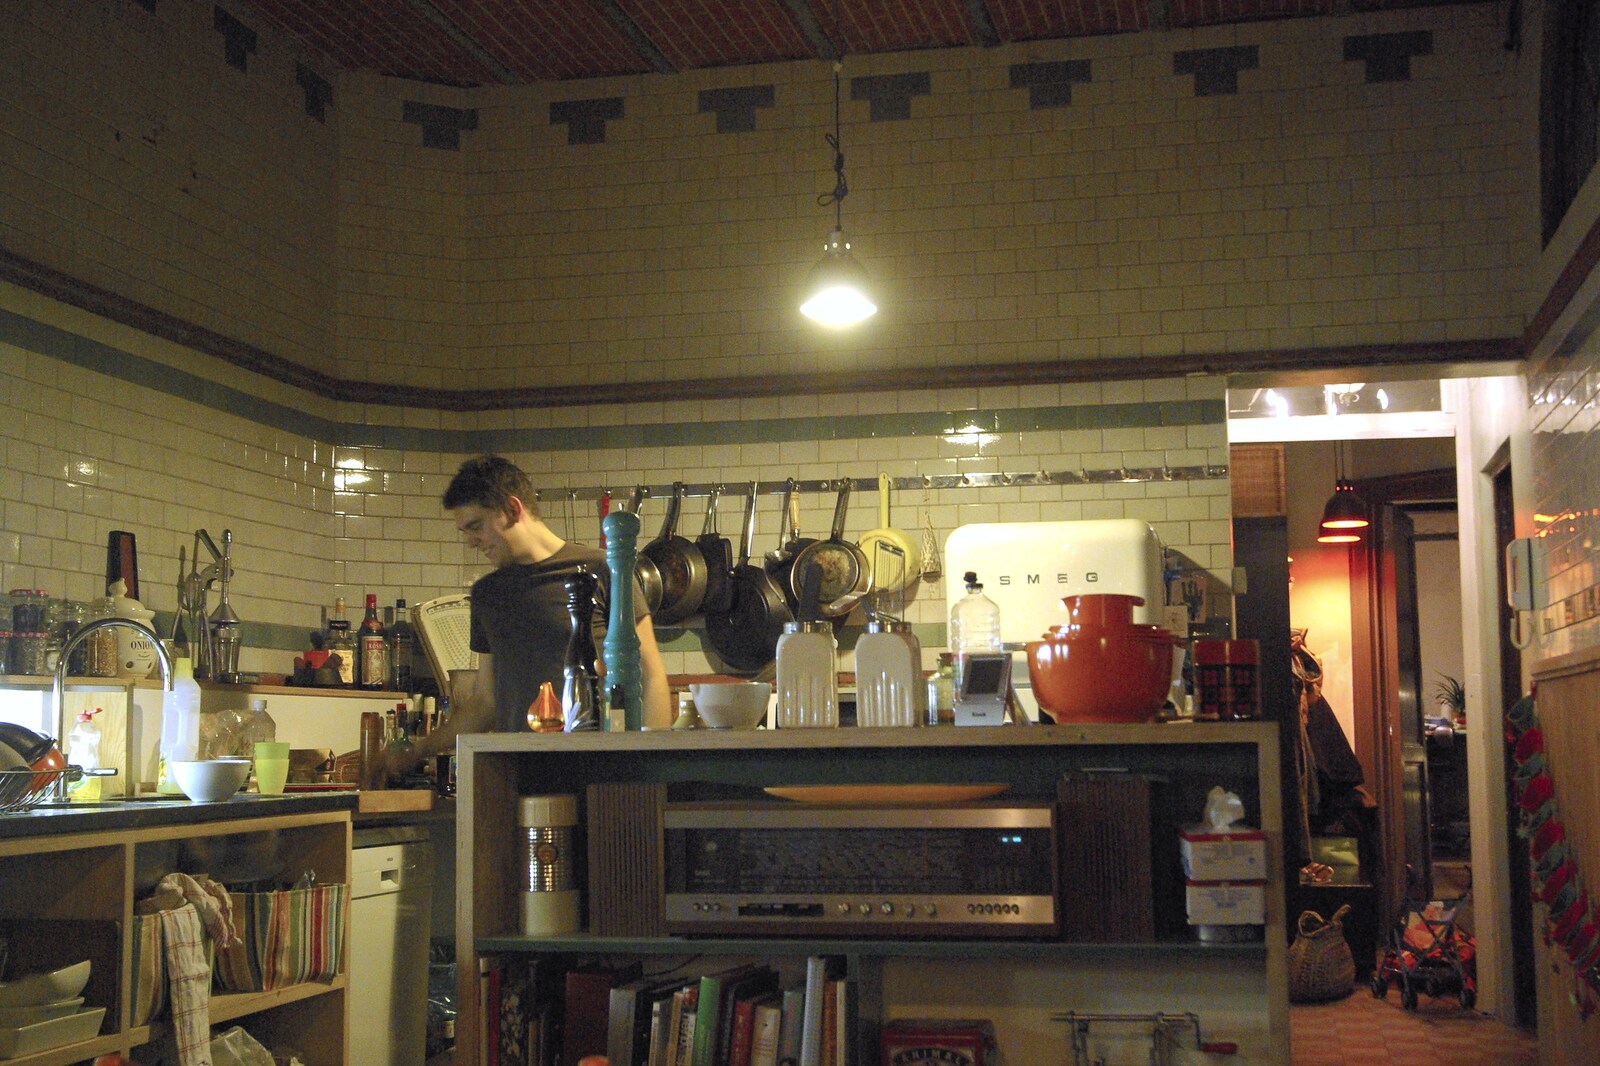 Pieter in the kitchen from The Christmas Markets of Brussels, Belgium - 1st January 2007